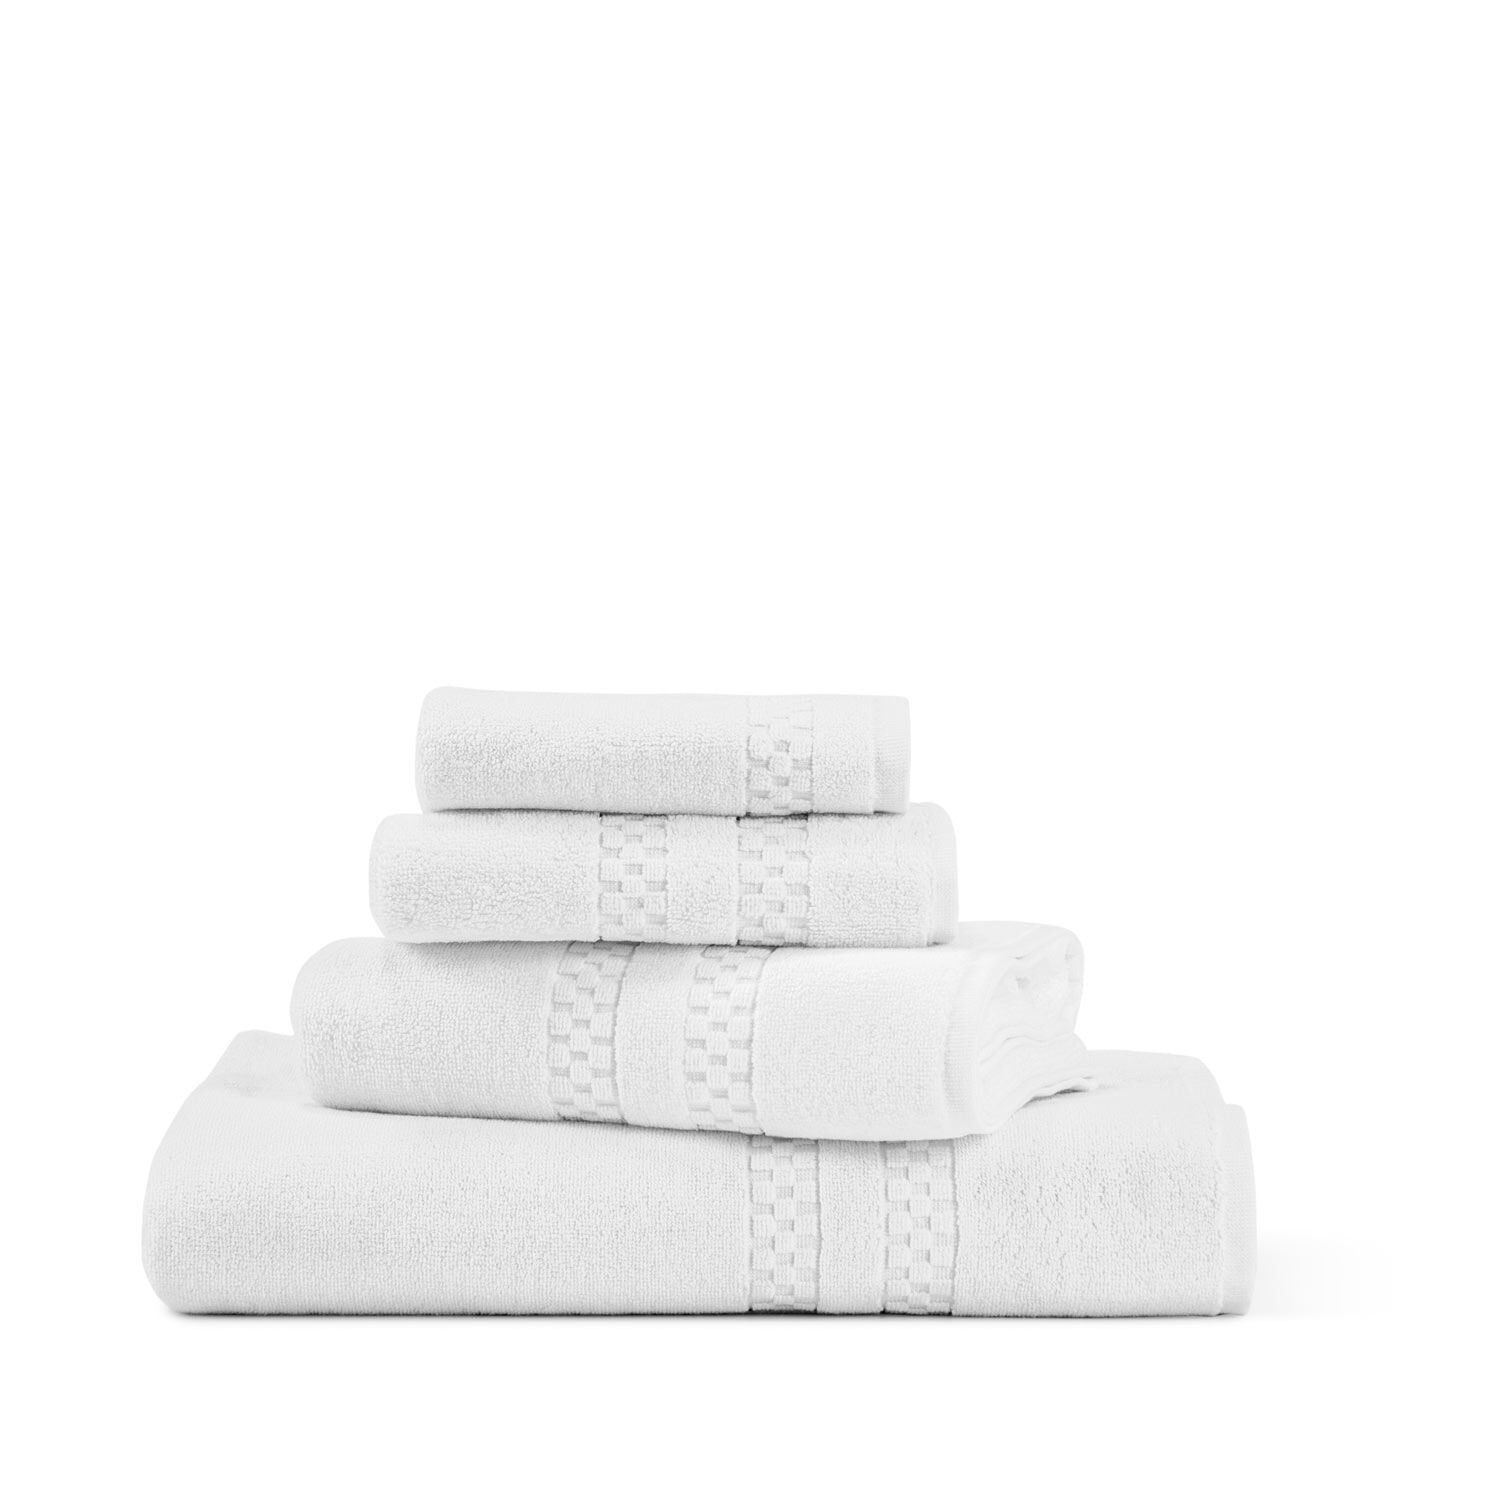 FEARRINGTON LIFESTYLE TOWEL COLLECTION - HAND TOWEL